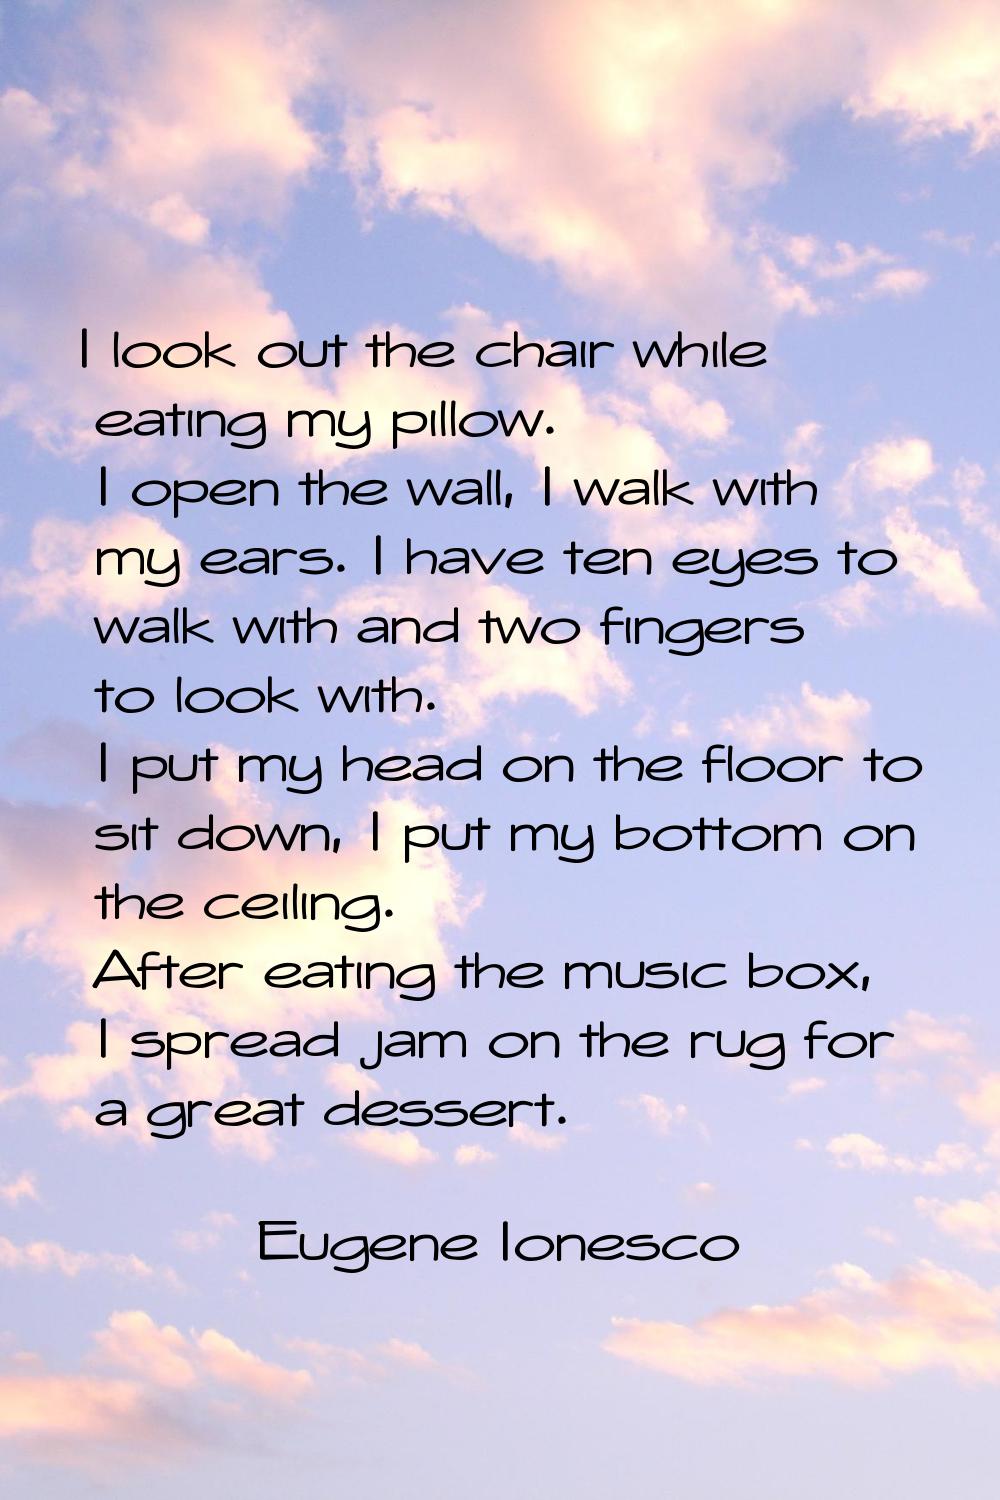 I look out the chair while eating my pillow. I open the wall, I walk with my ears. I have ten eyes 